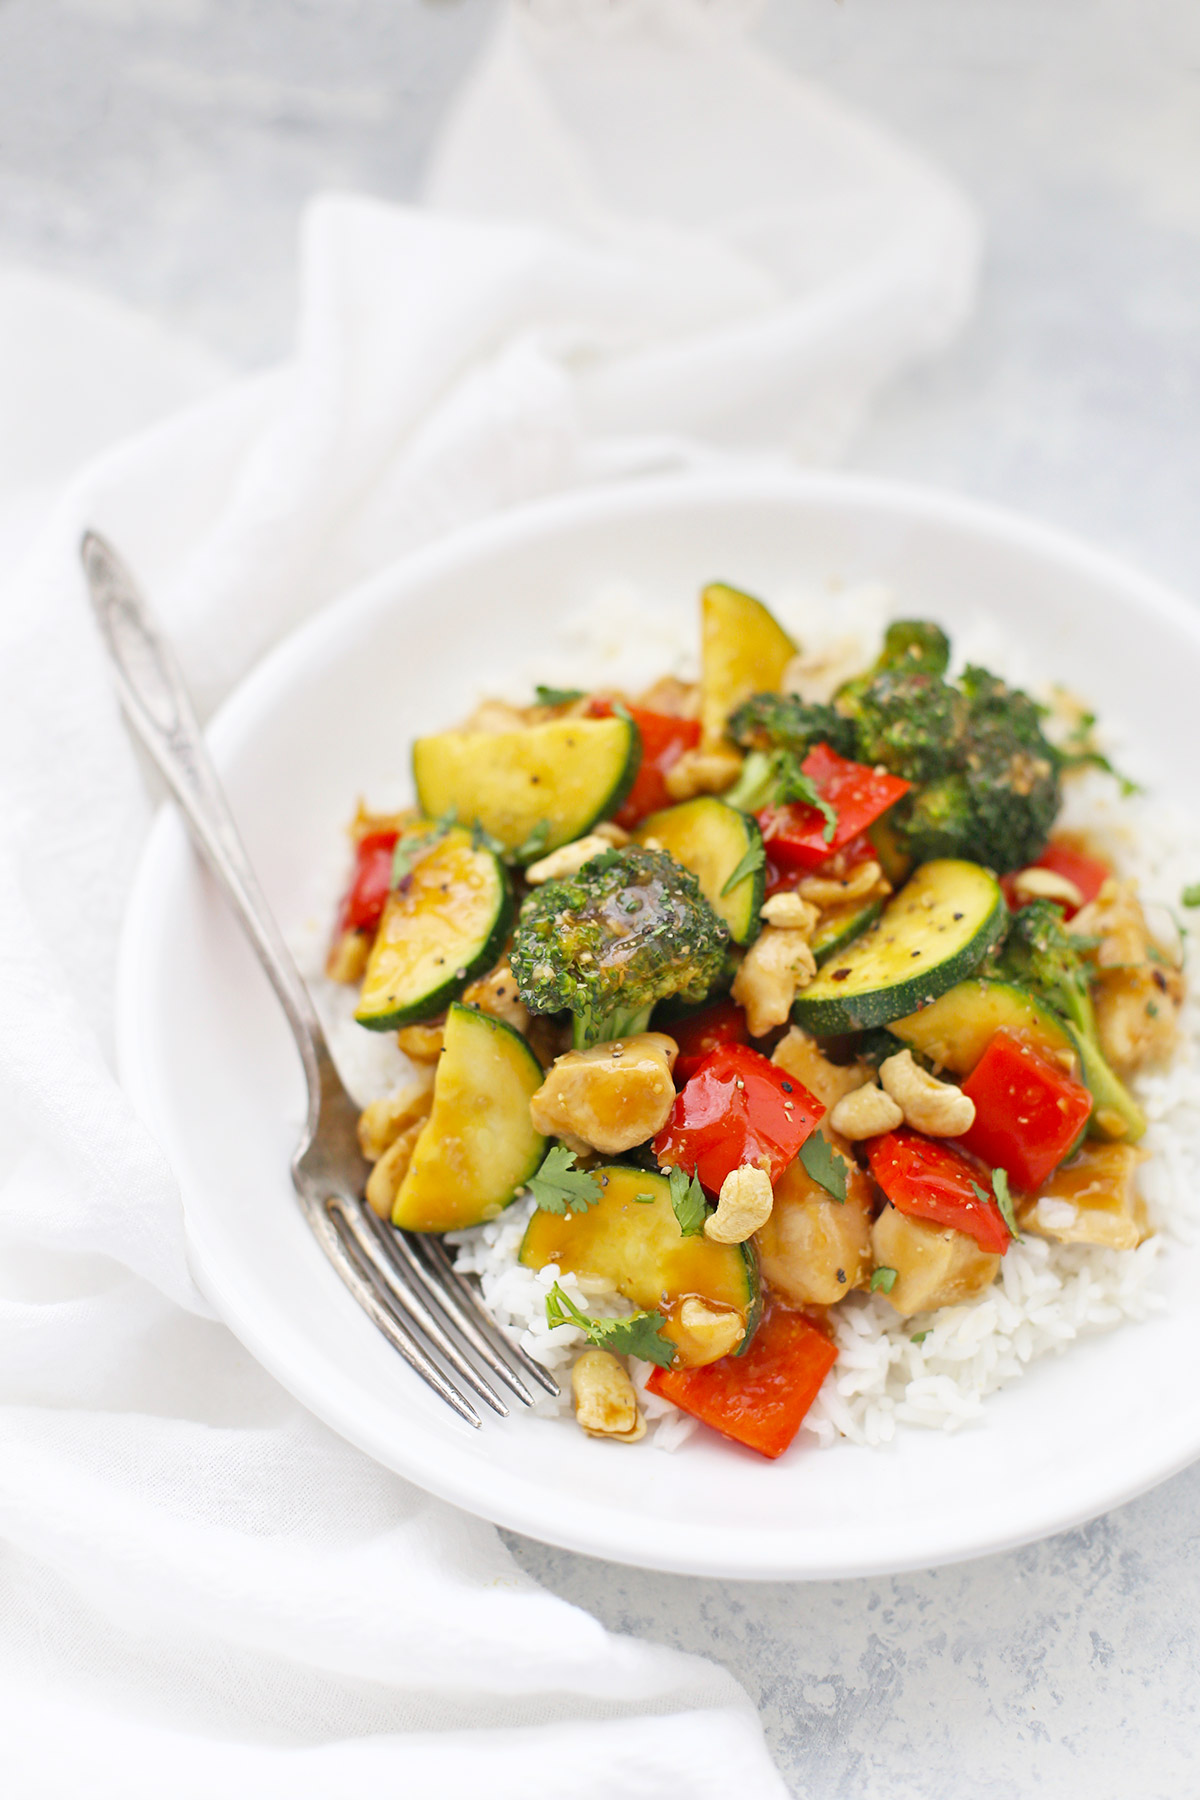 Healthy Cashew Chicken from One Lovely Life (Gluten-Free, Paleo)